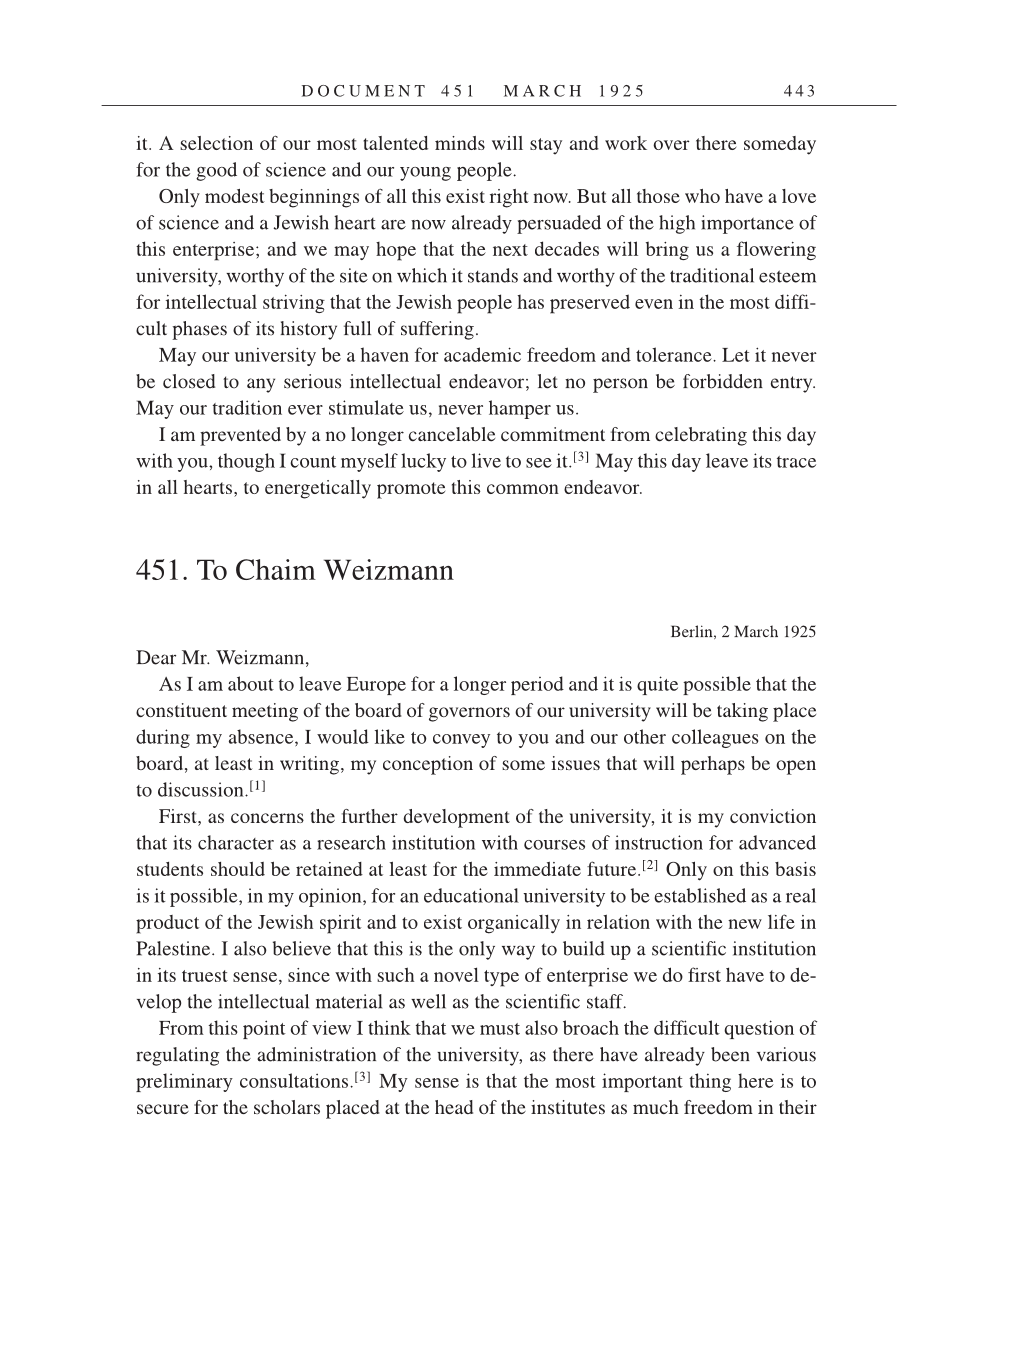 Volume 14: The Berlin Years: Writings & Correspondence, April 1923-May 1925 (English Translation Supplement) page 443